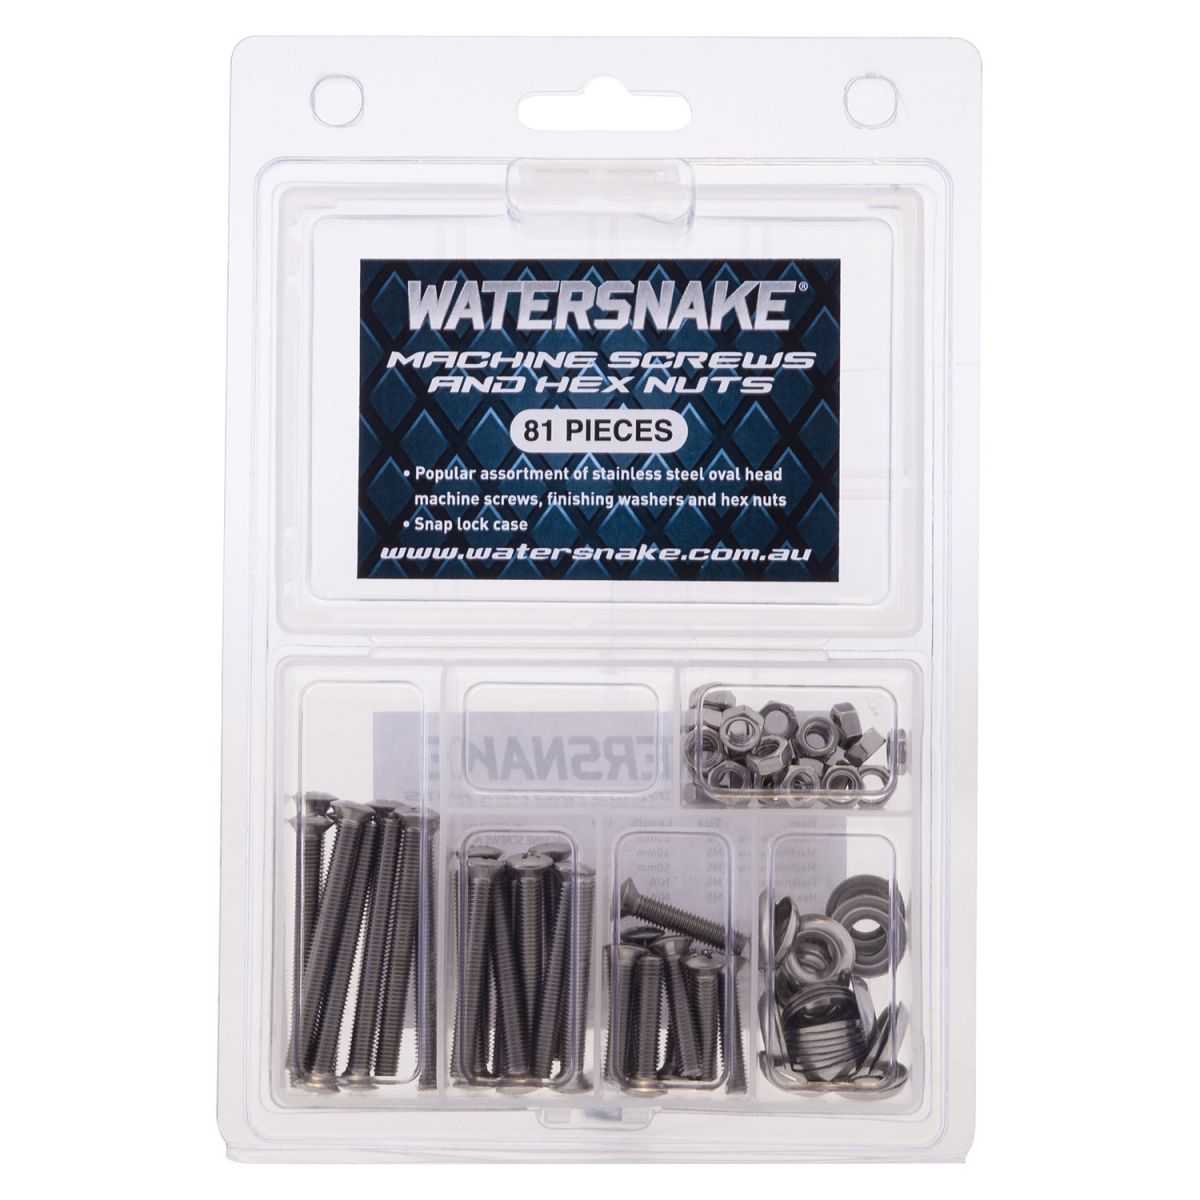 Watersnake Stainless Steel Machined Screws And Hex Nut Bulk Value Kit - 59089